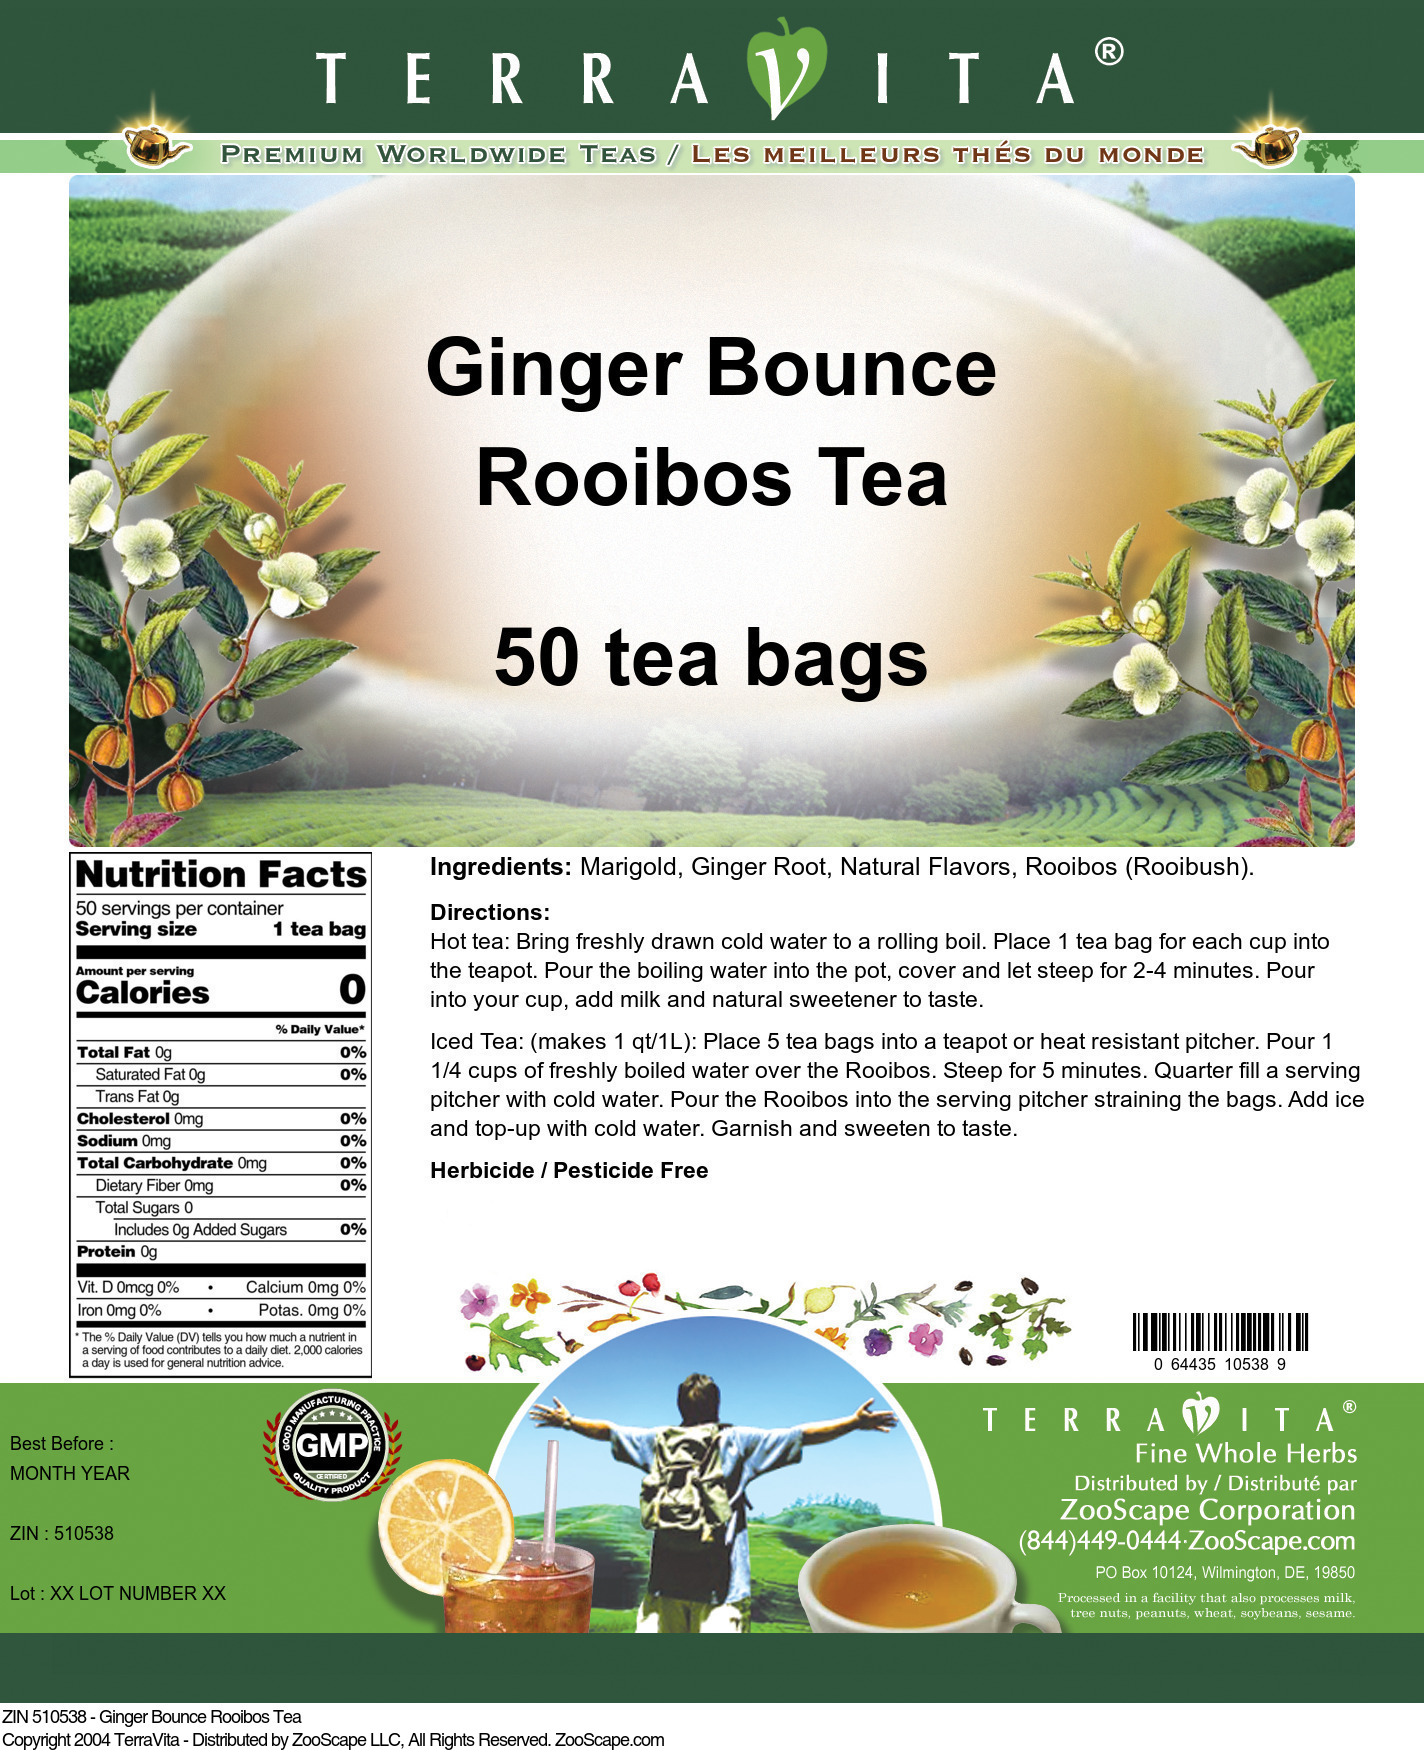 Ginger Bounce Rooibos Tea - Label